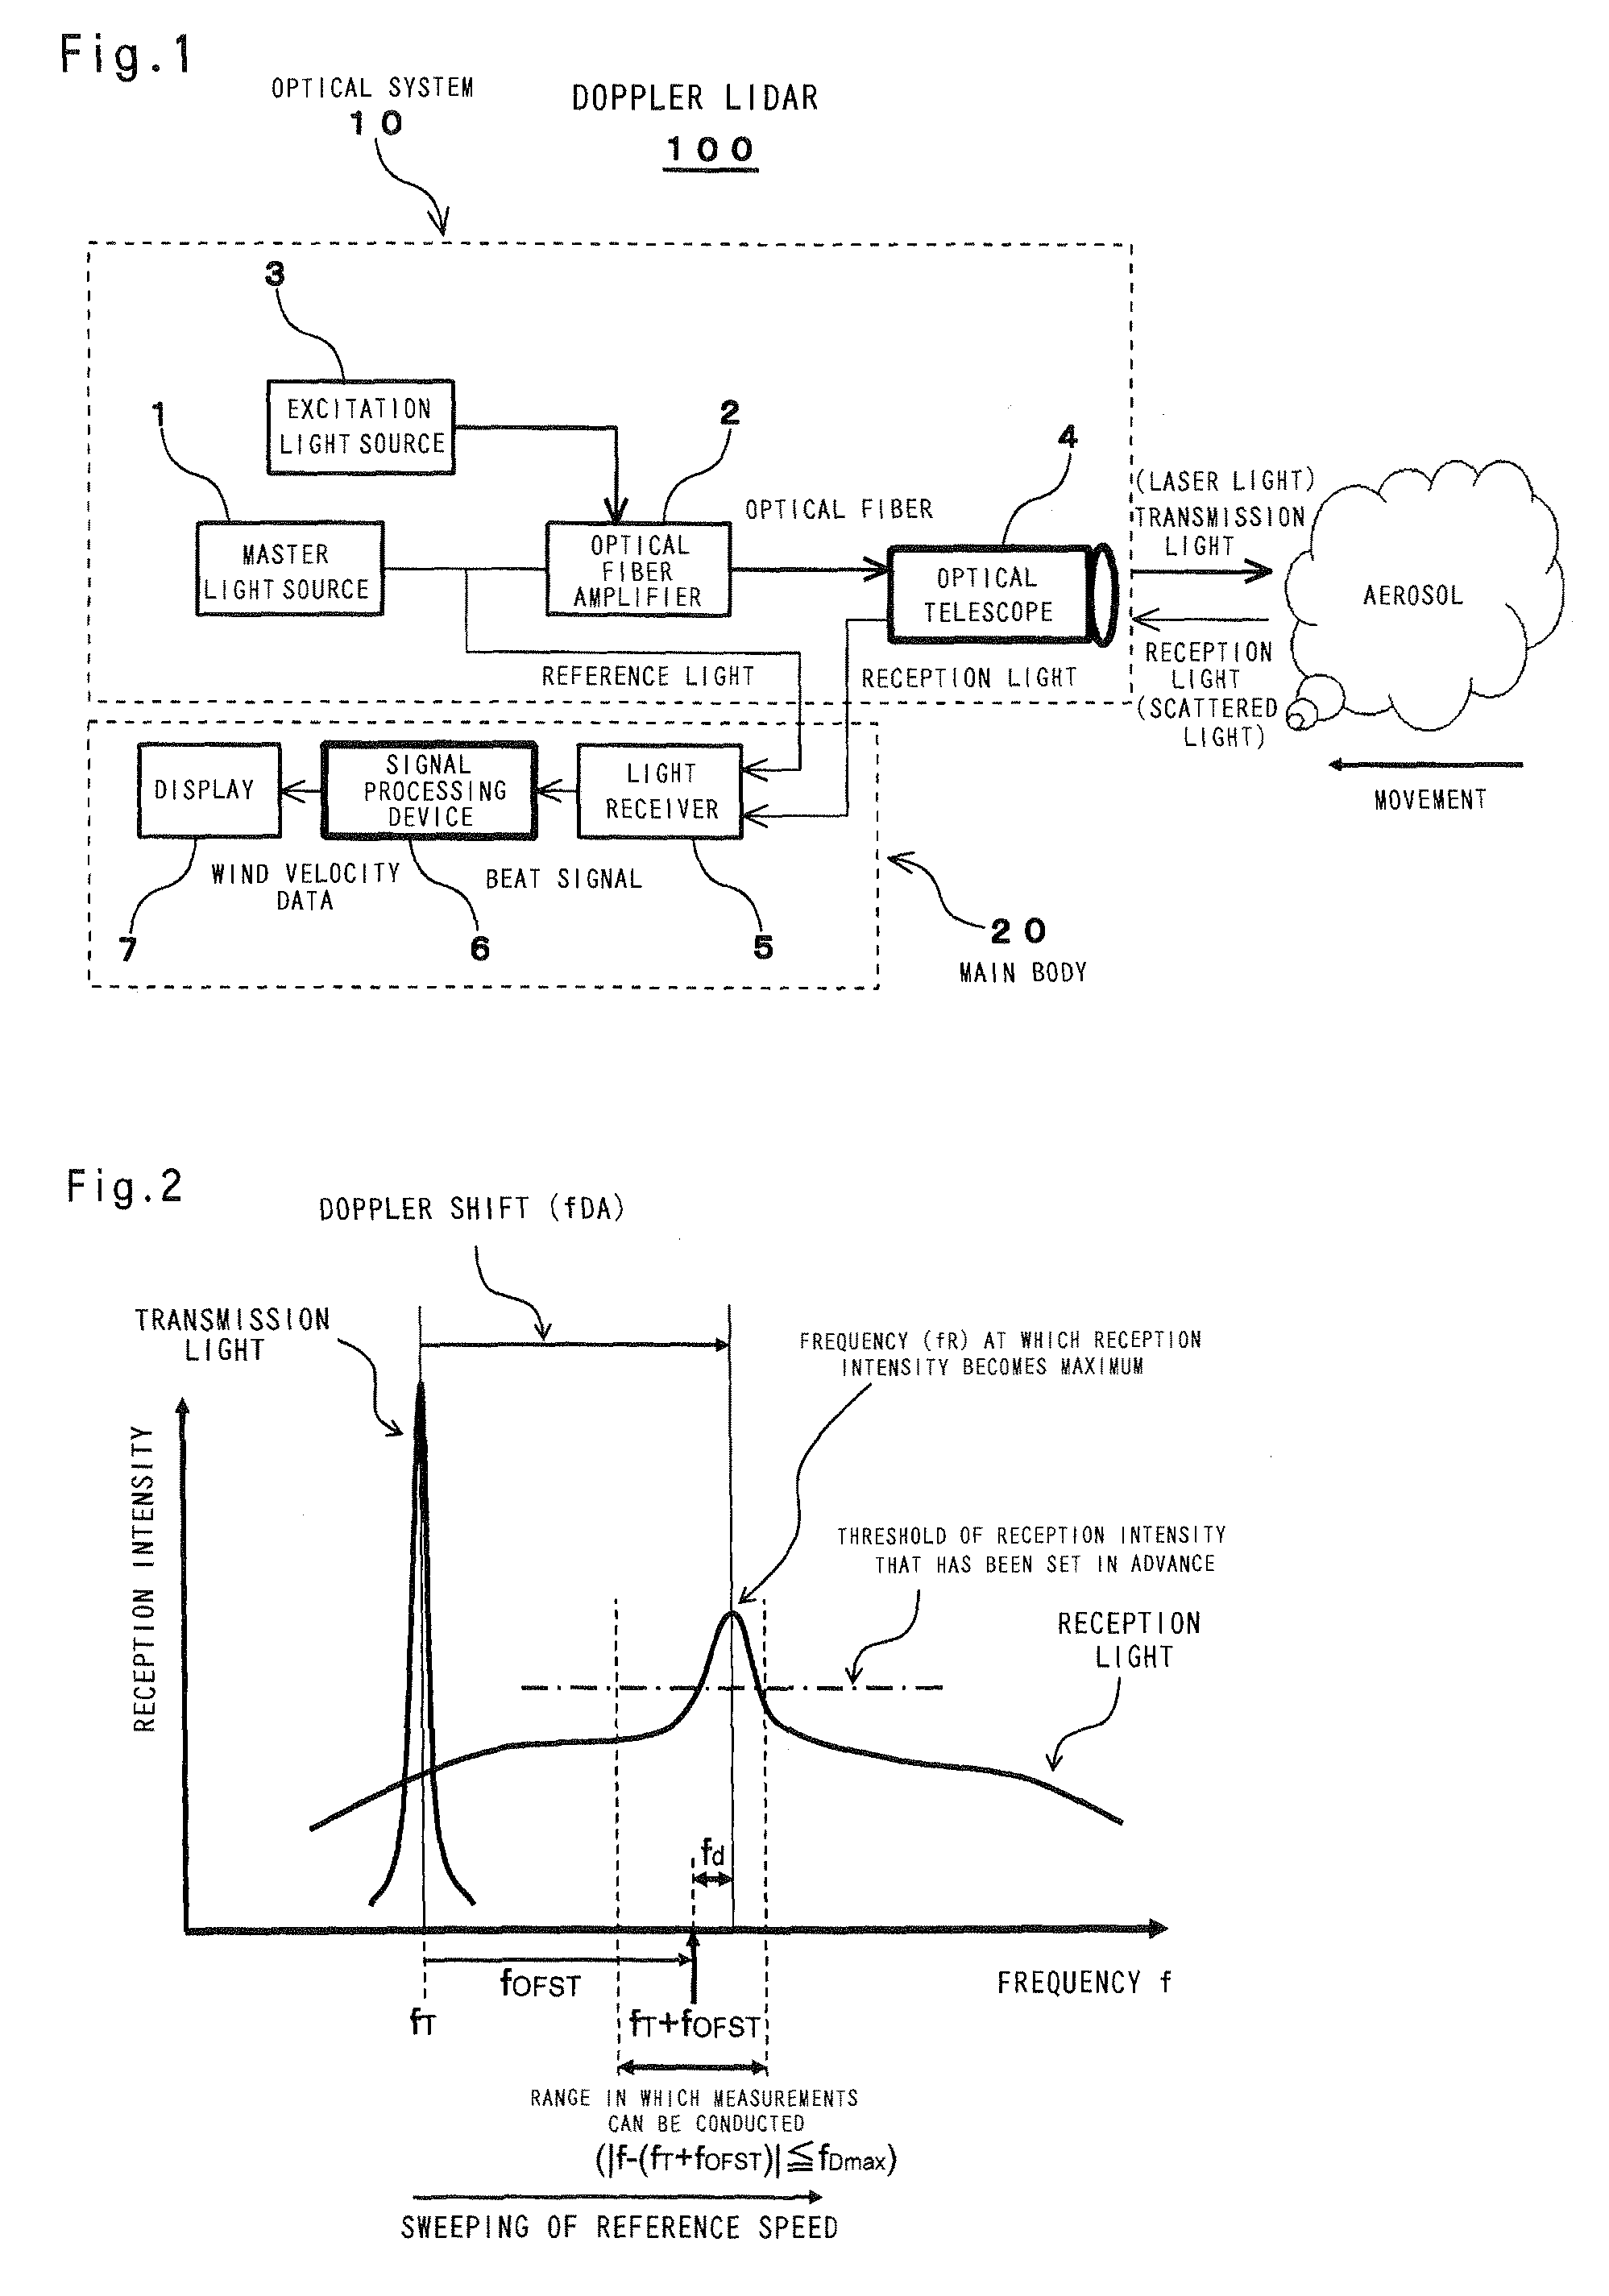 Method for measuring airspeed by optical air data sensor